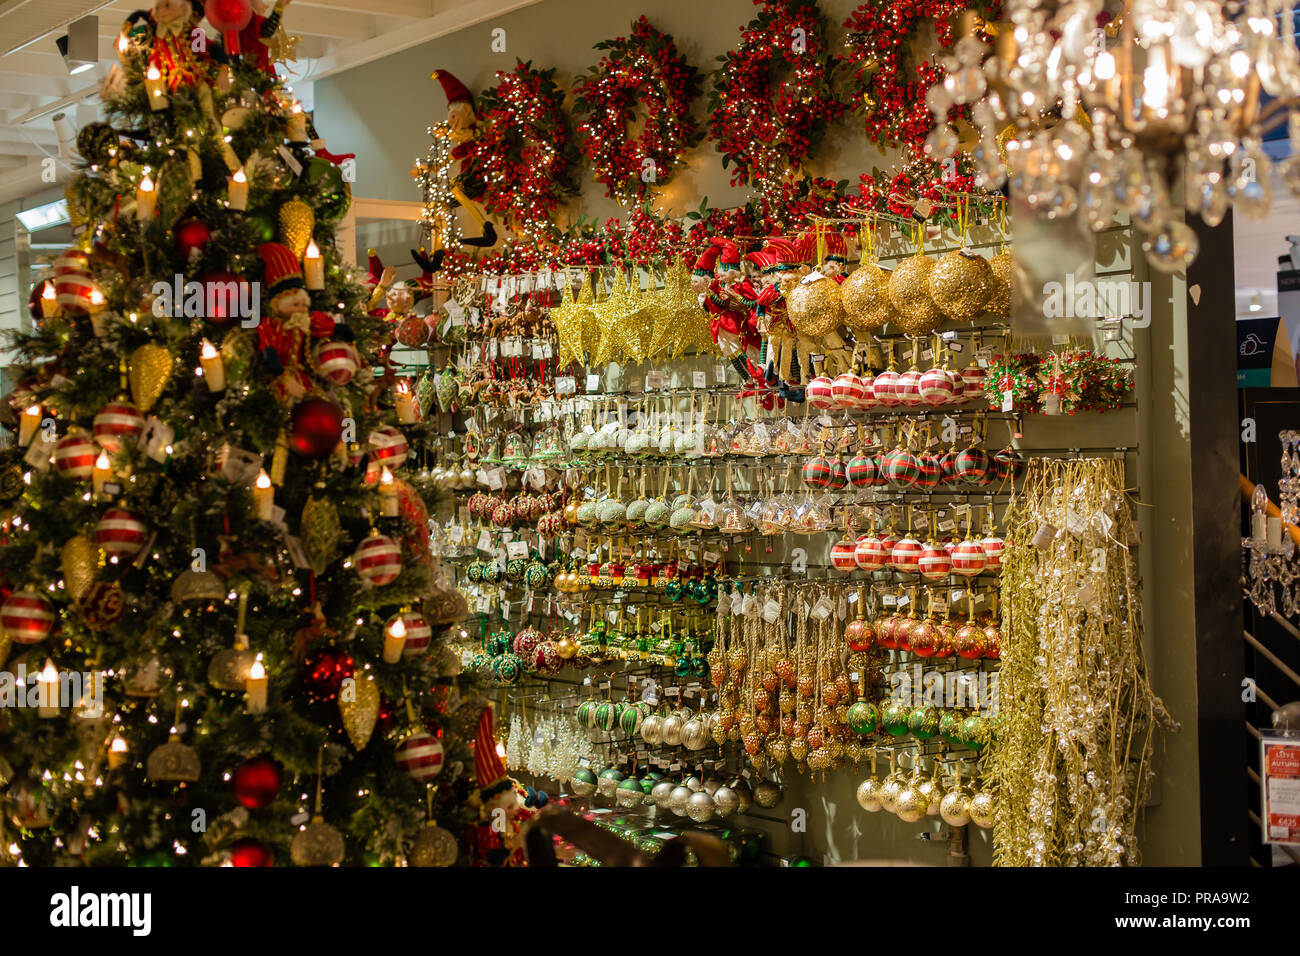 Christmas Decorations Merchandised In The Retail Store Stock Photo Alamy